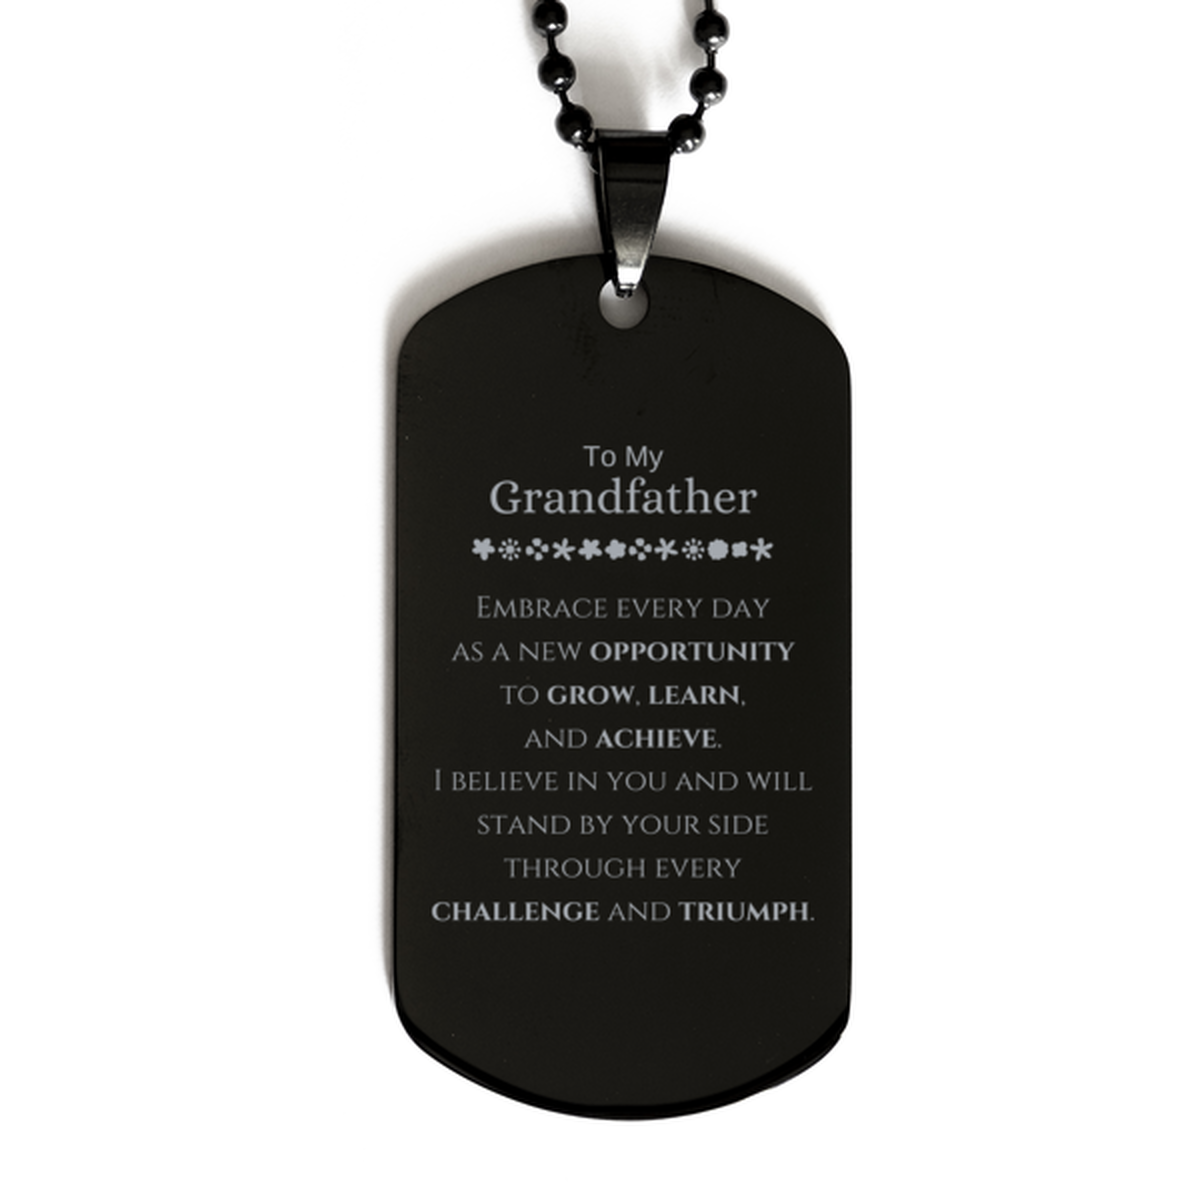 To My Grandfather Gifts, I believe in you and will stand by your side, Inspirational Black Dog Tag For Grandfather, Birthday Christmas Motivational Grandfather Gifts